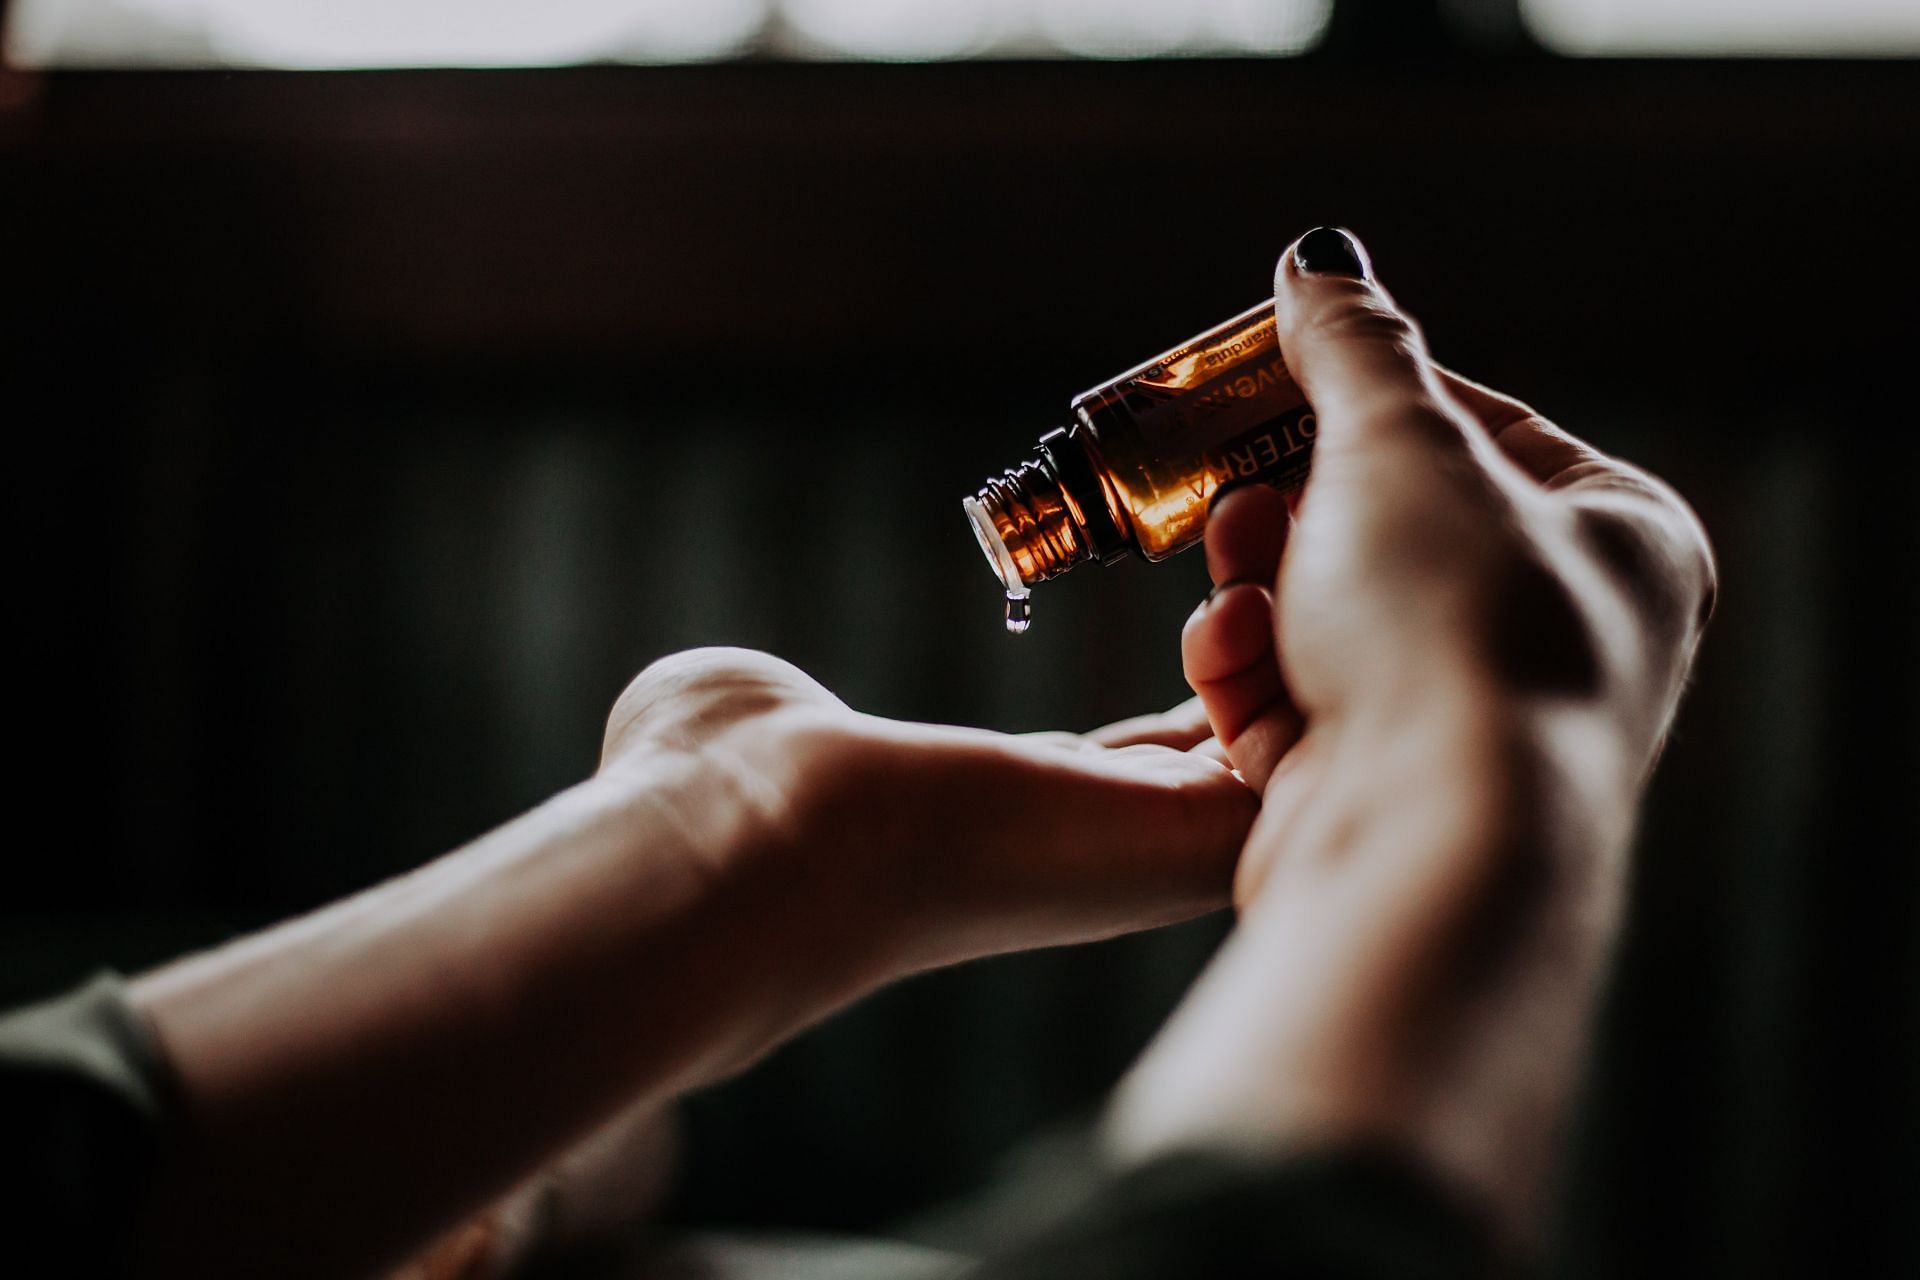 Almond oil can strengthen the skin barrier. (Image via Unsplash/Christin Hume)